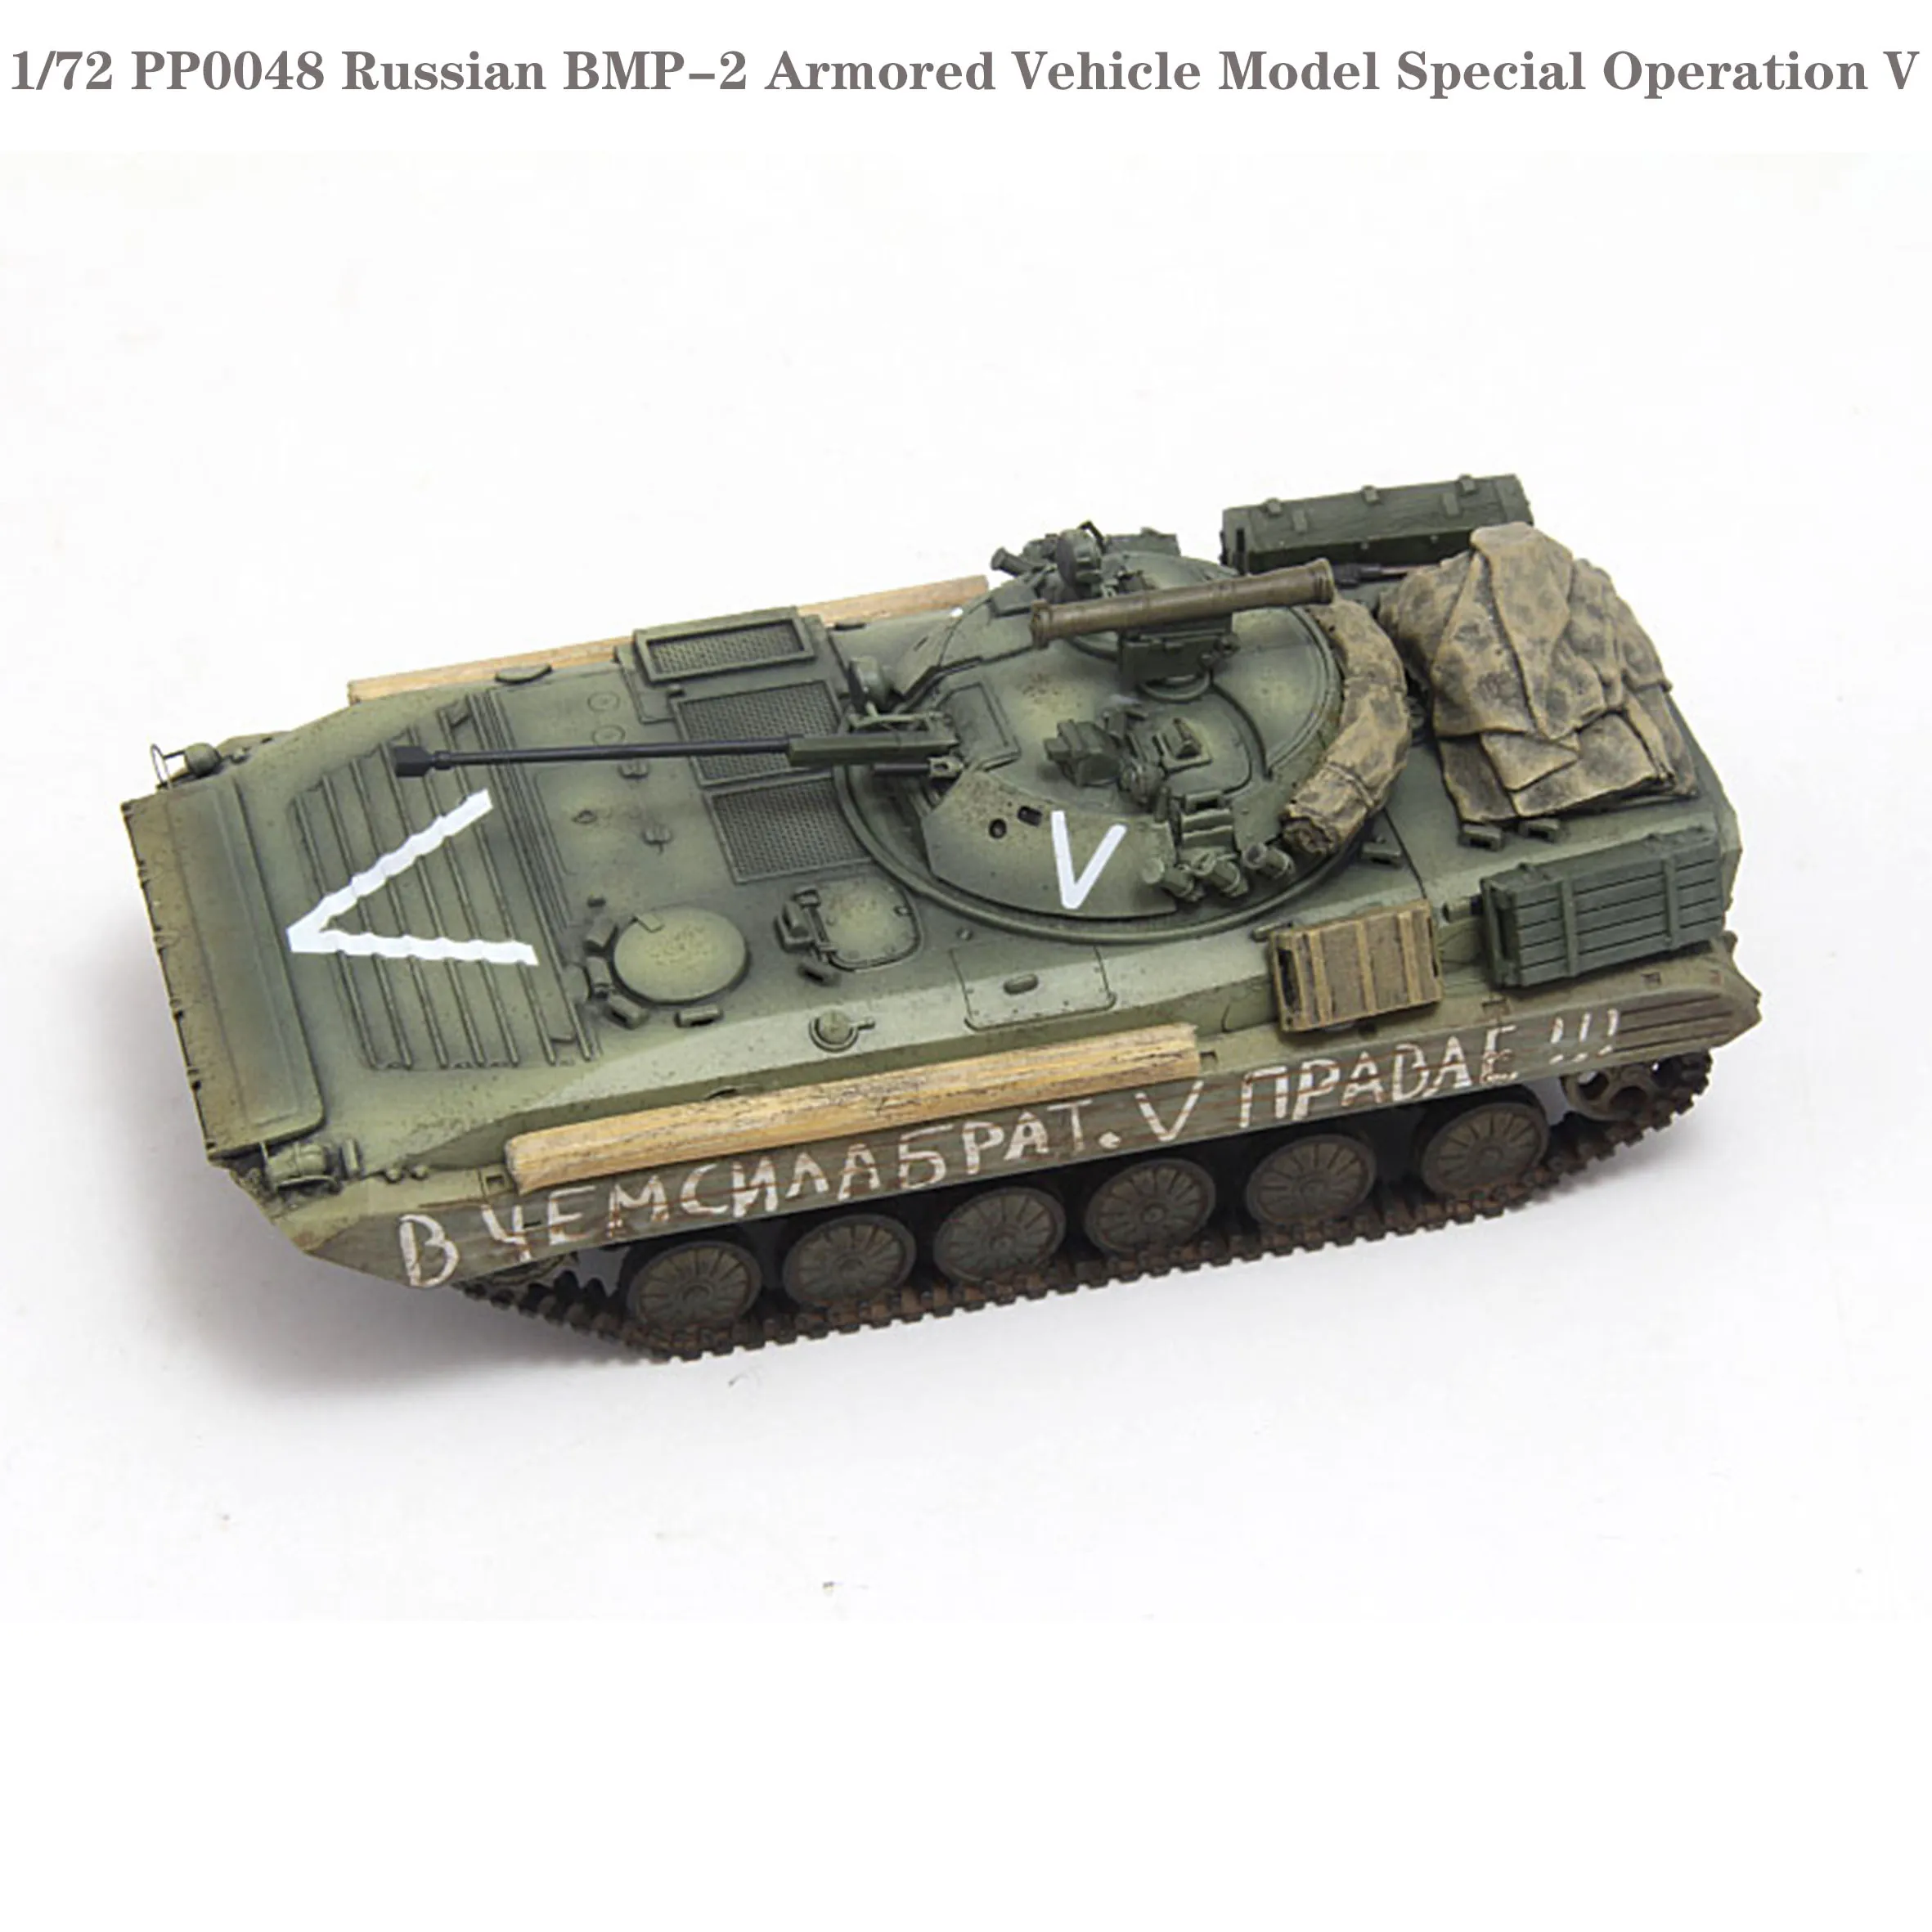 

1/72 PP0048 Russian BMP-2 Armored Vehicle Model Special Operation V Finished product collection model